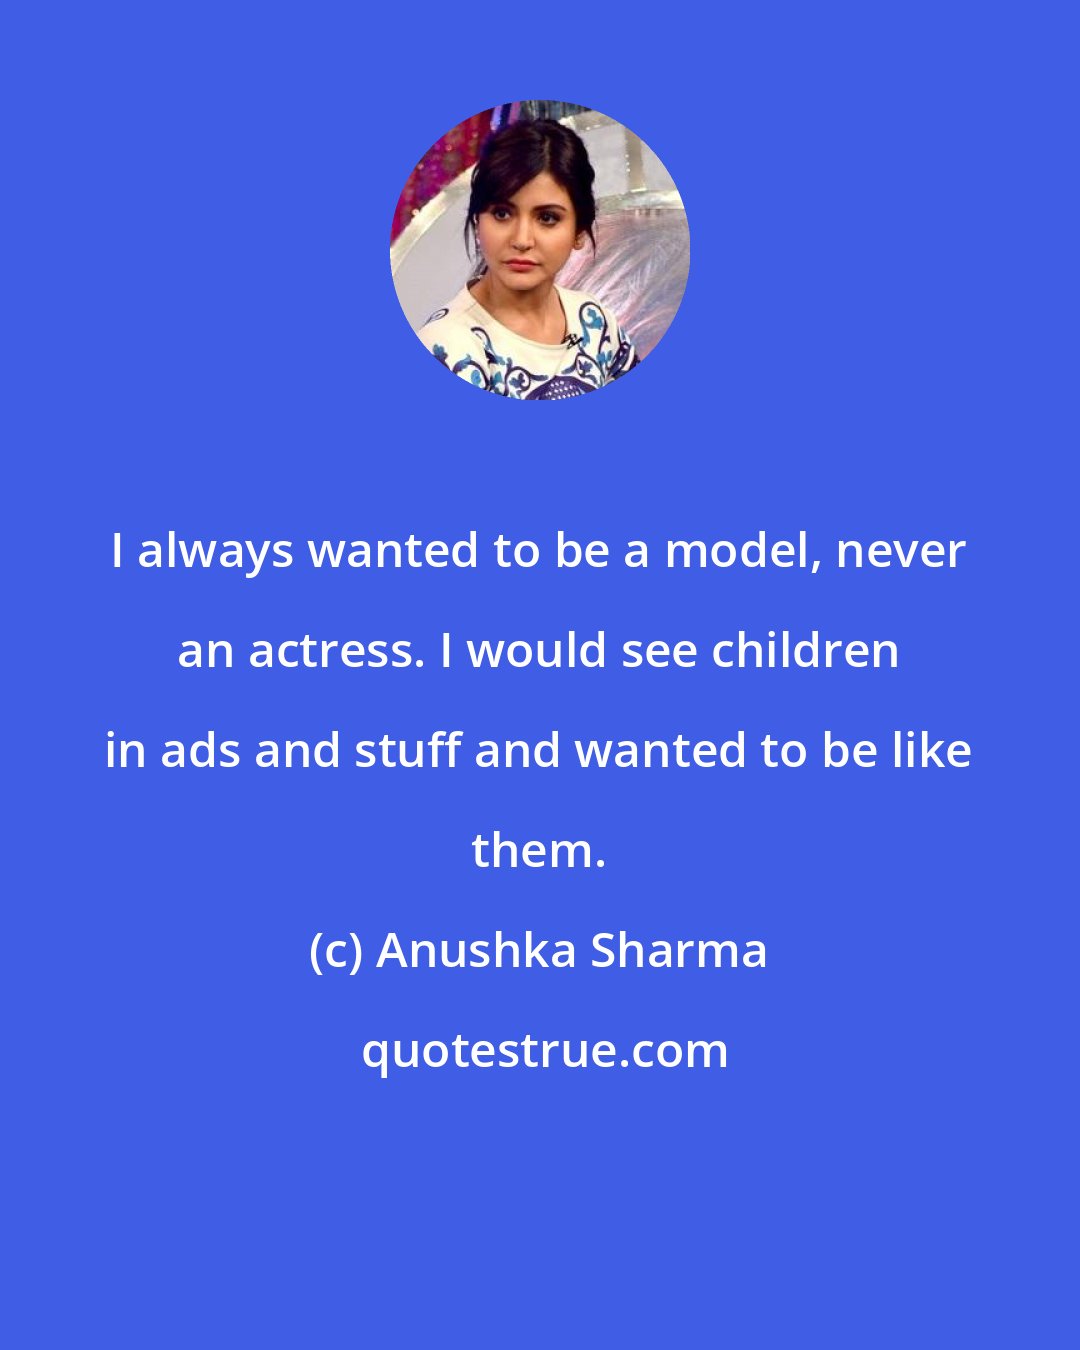 Anushka Sharma: I always wanted to be a model, never an actress. I would see children in ads and stuff and wanted to be like them.